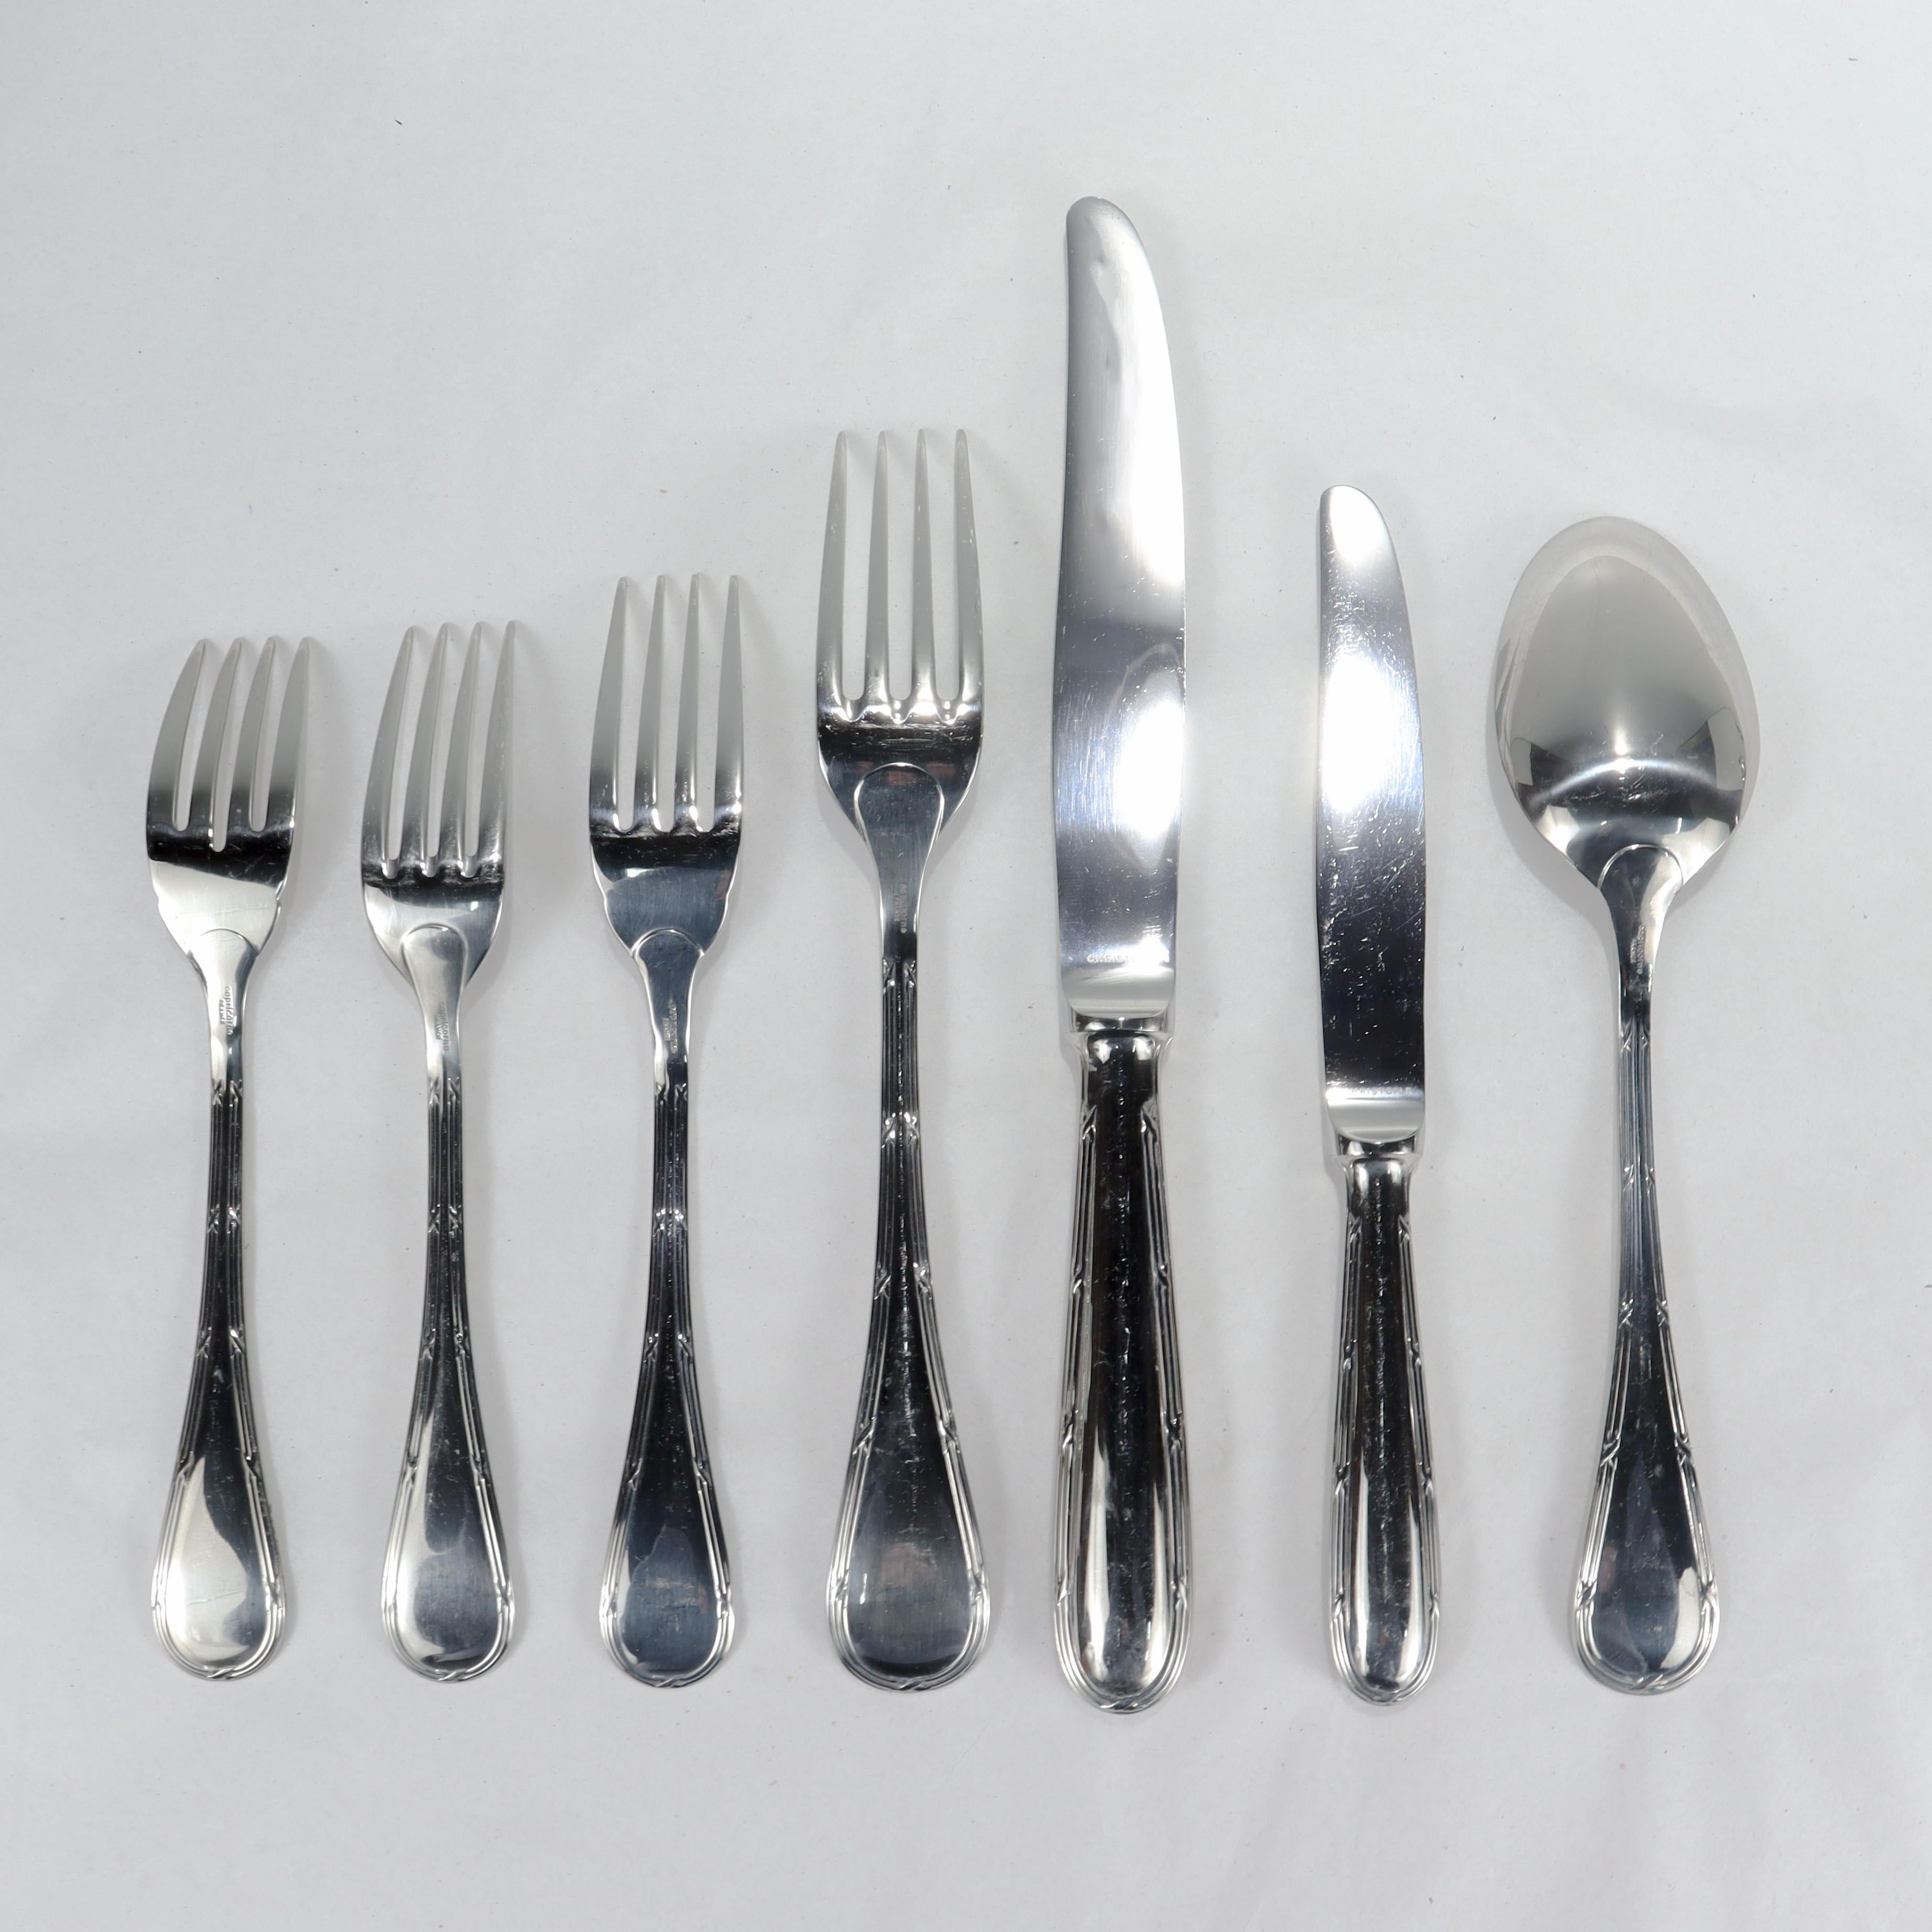 A very fine stainless steel flatware set.

By Christofle in their Capricorne line.

In the Pastorale pattern.

Consisting of:
12 Forks (8 1/4